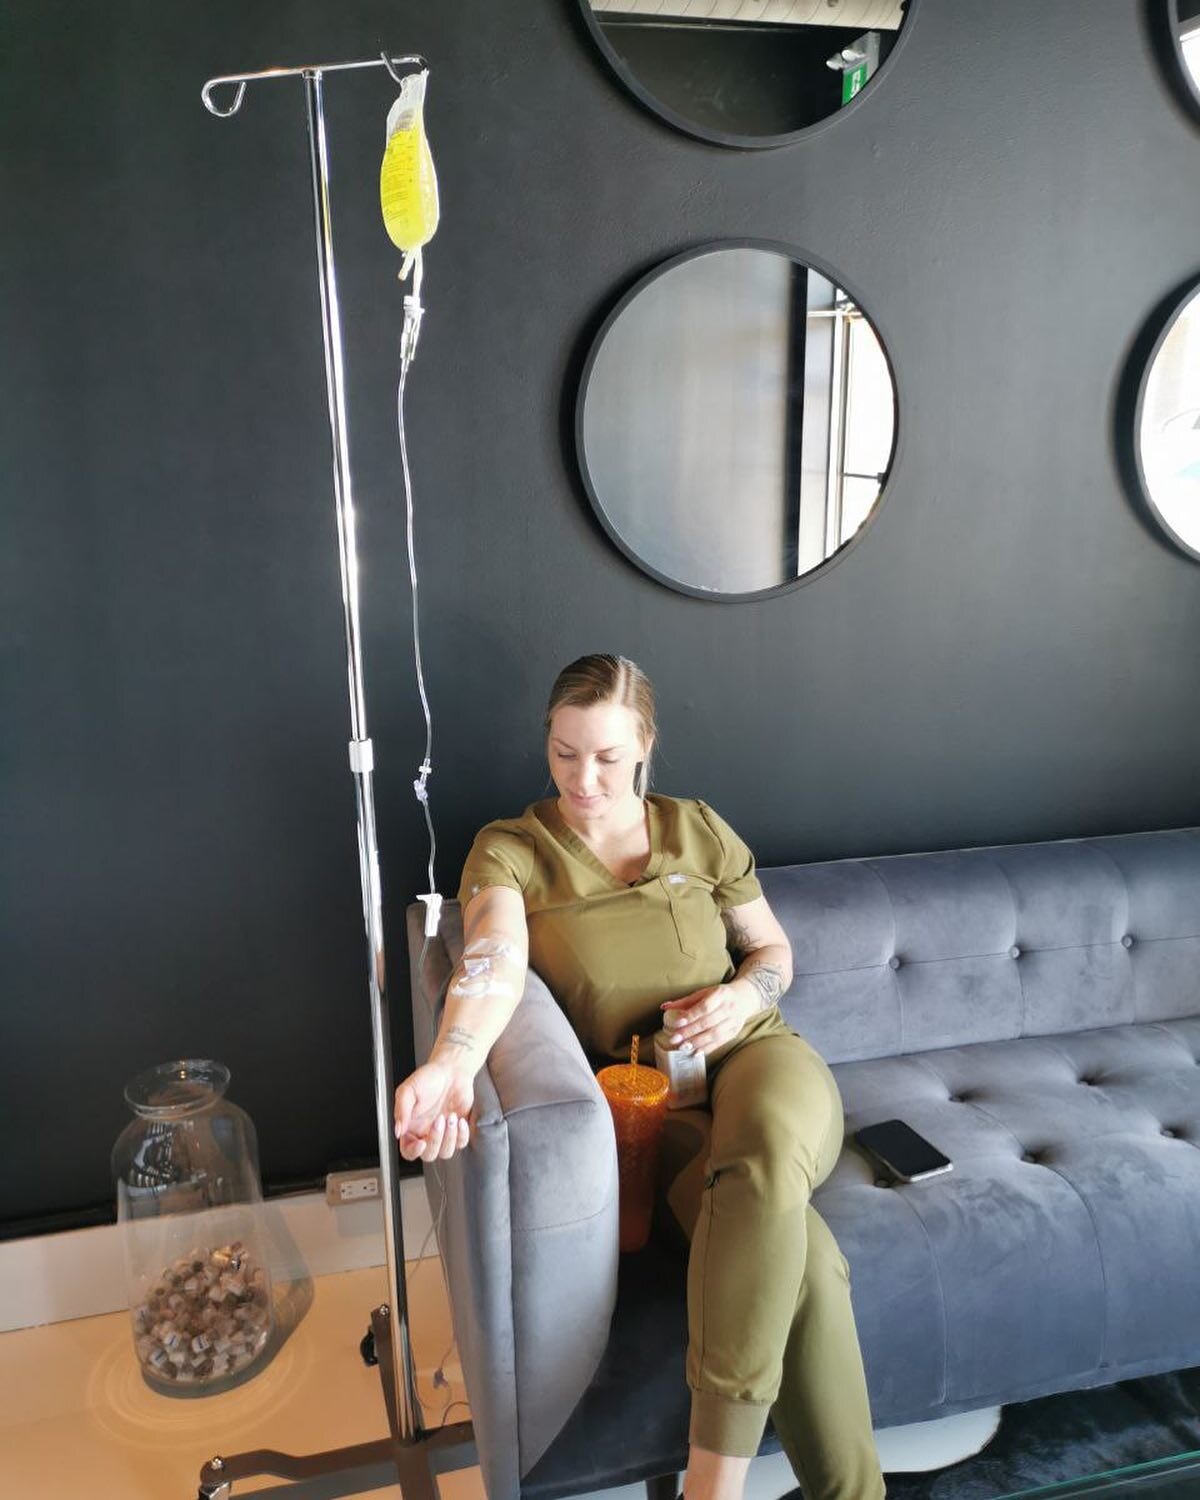 Being a little under the weather I had on hand my greens, Energy Elixir and our lovely nurse Kristin gave me a little reboot with and our &ldquo;Energy&rdquo; IV Therapy from @farskhealth 

Feeling grateful, refreshed and ready to make it through the